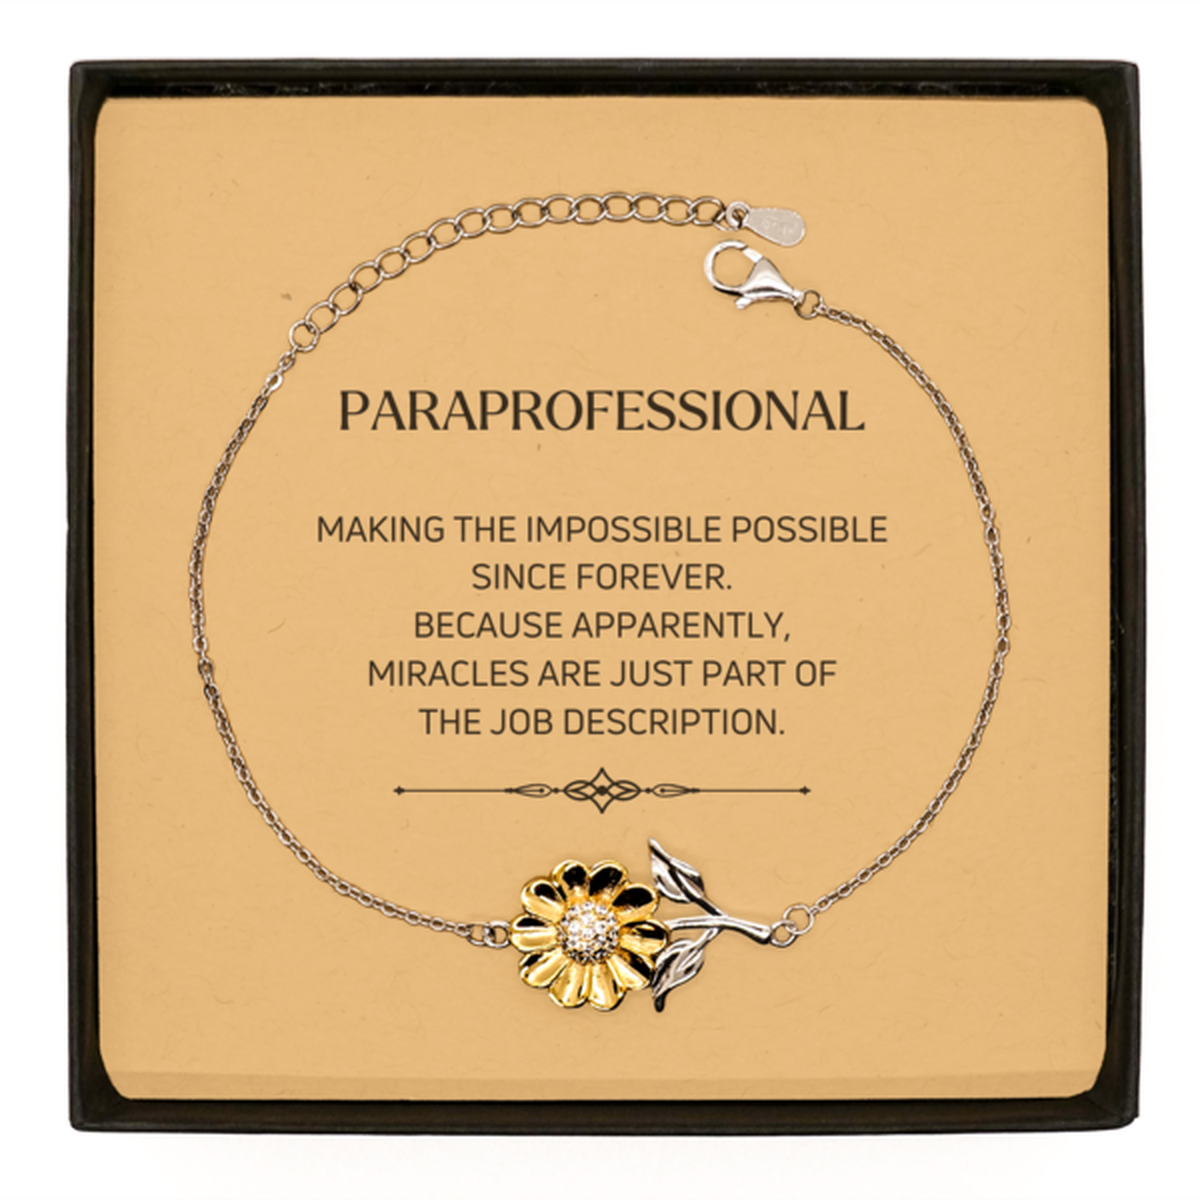 Funny Paraprofessional Gifts, Miracles are just part of the job description, Inspirational Birthday Sunflower Bracelet For Paraprofessional, Men, Women, Coworkers, Friends, Boss